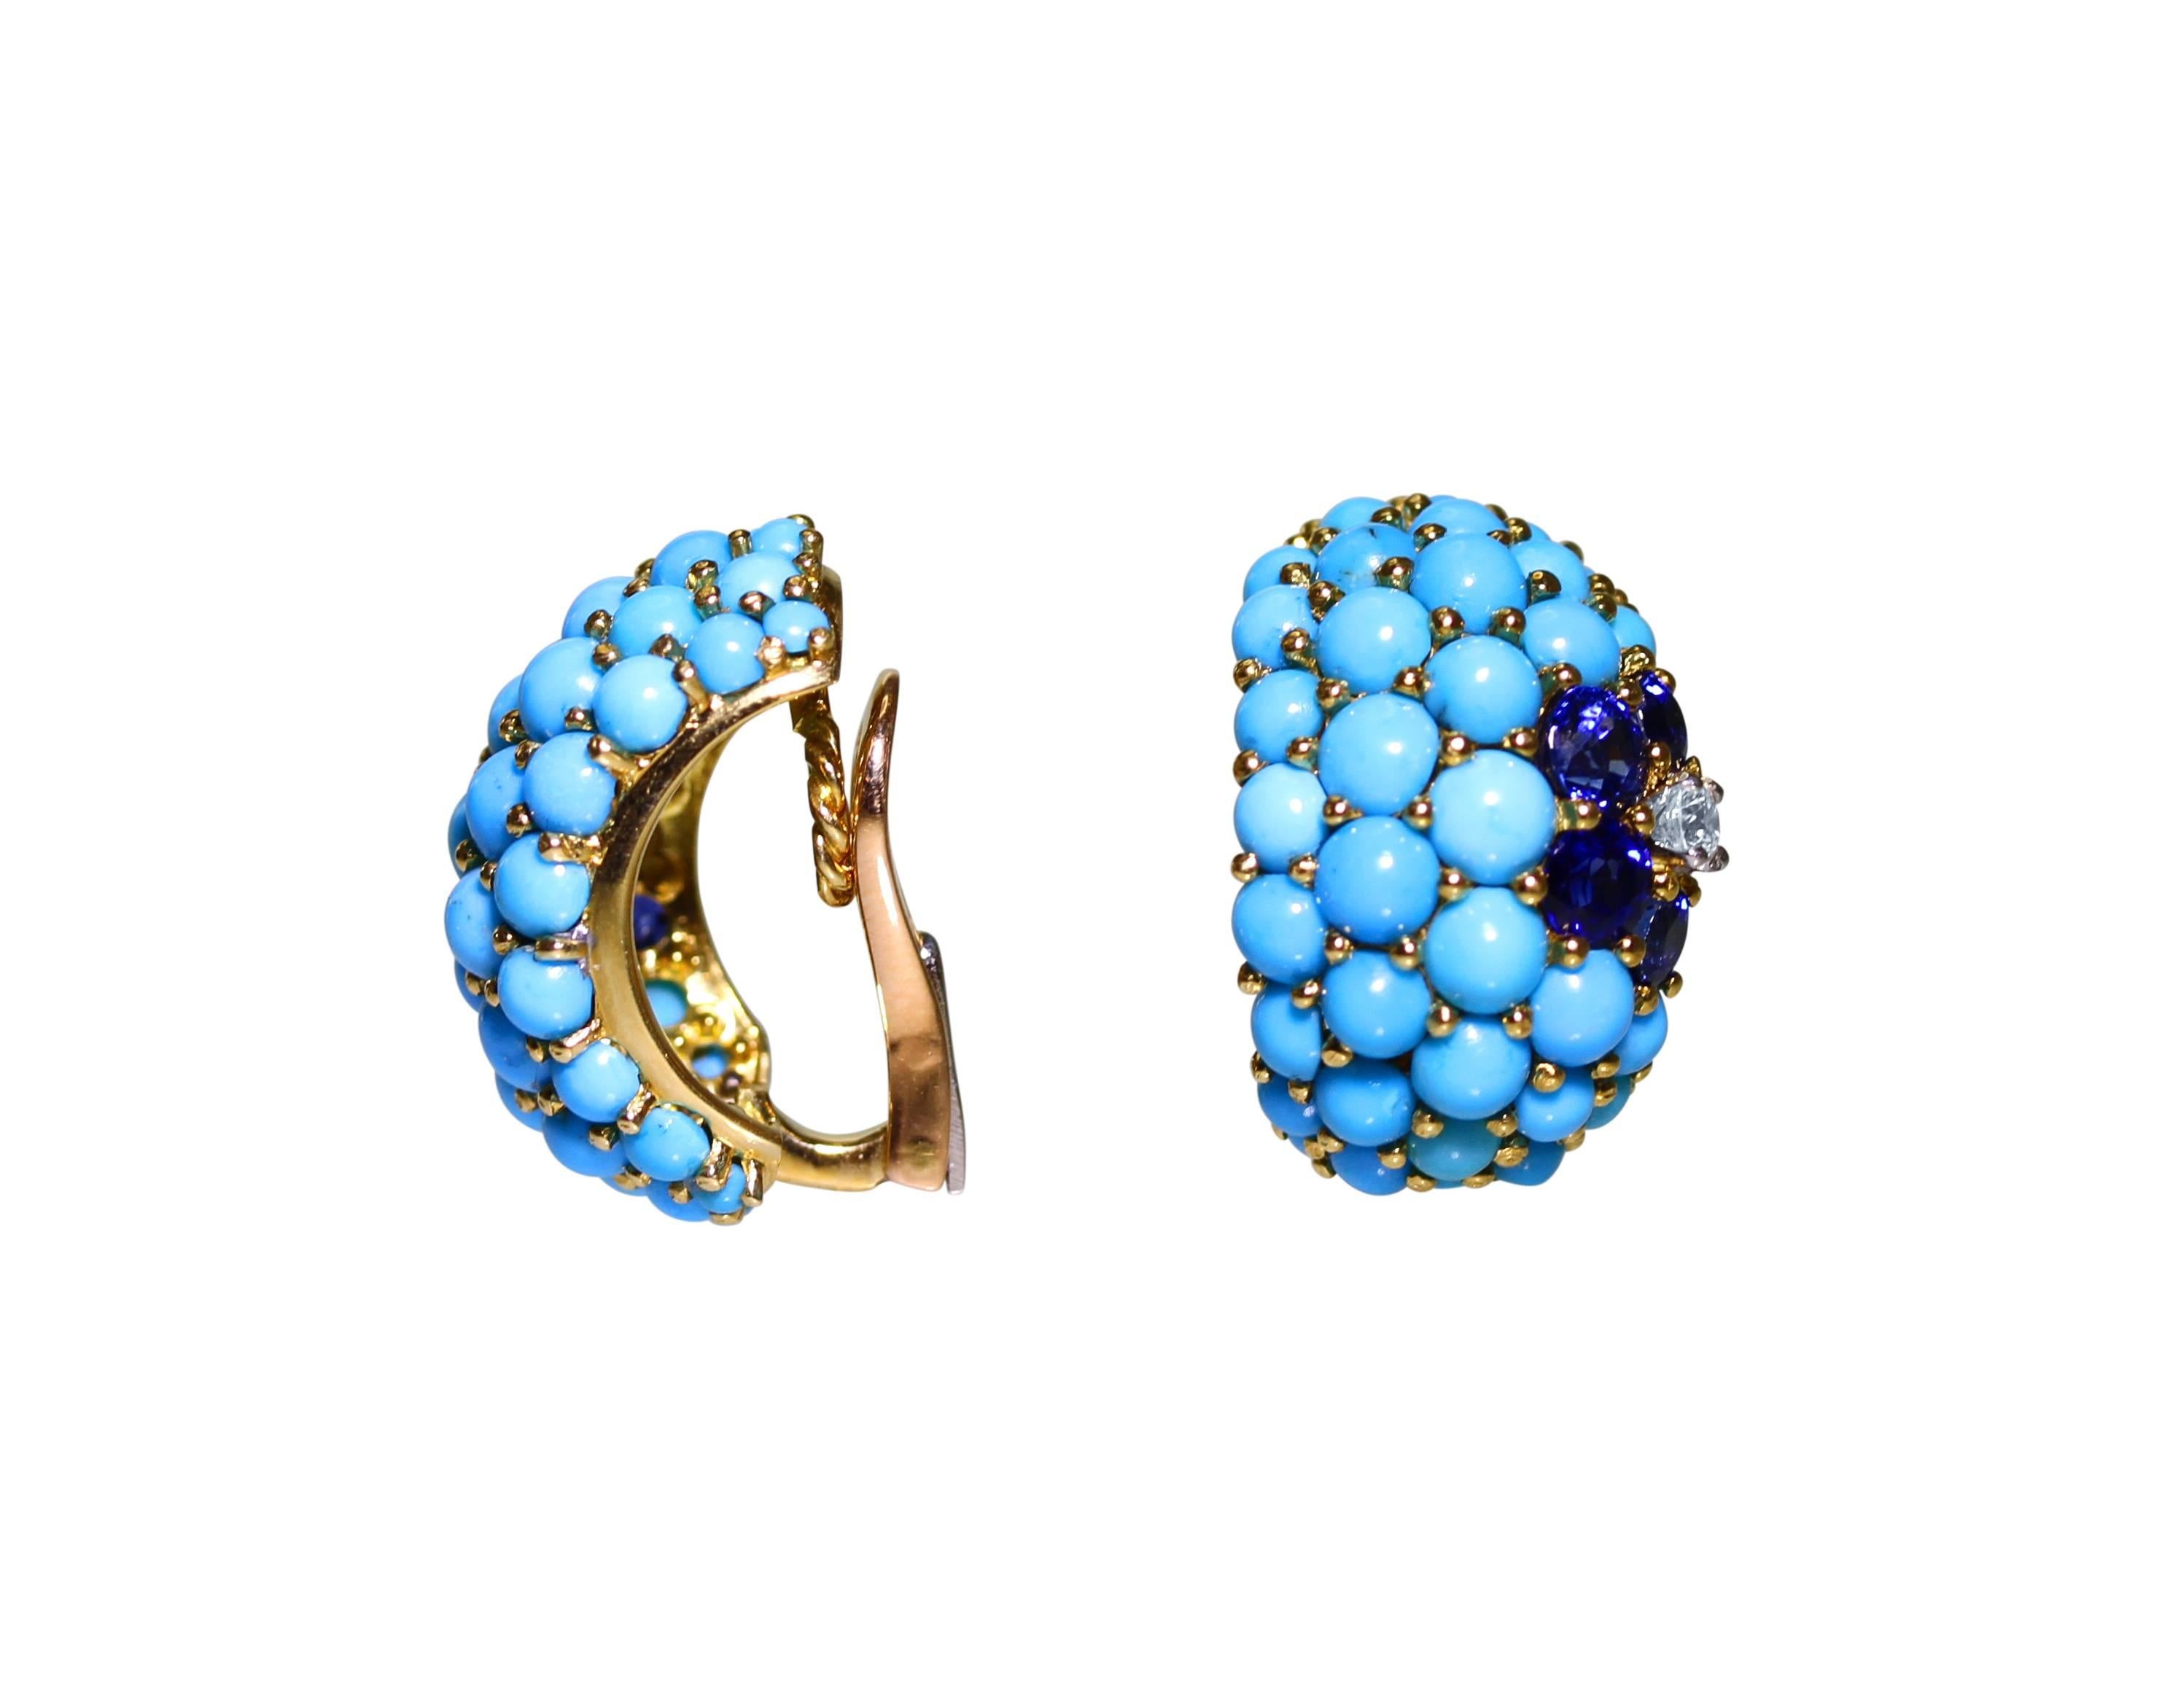 A pair of 18 karat gold, turquoise, sapphire and diamond earclips by Carvin French, of half-hoop bombe design accented by flowerheads, set with 70 turquoise cabochons, 8 round sapphires weighing approximately 2.50 carats, and 2 round diamonds